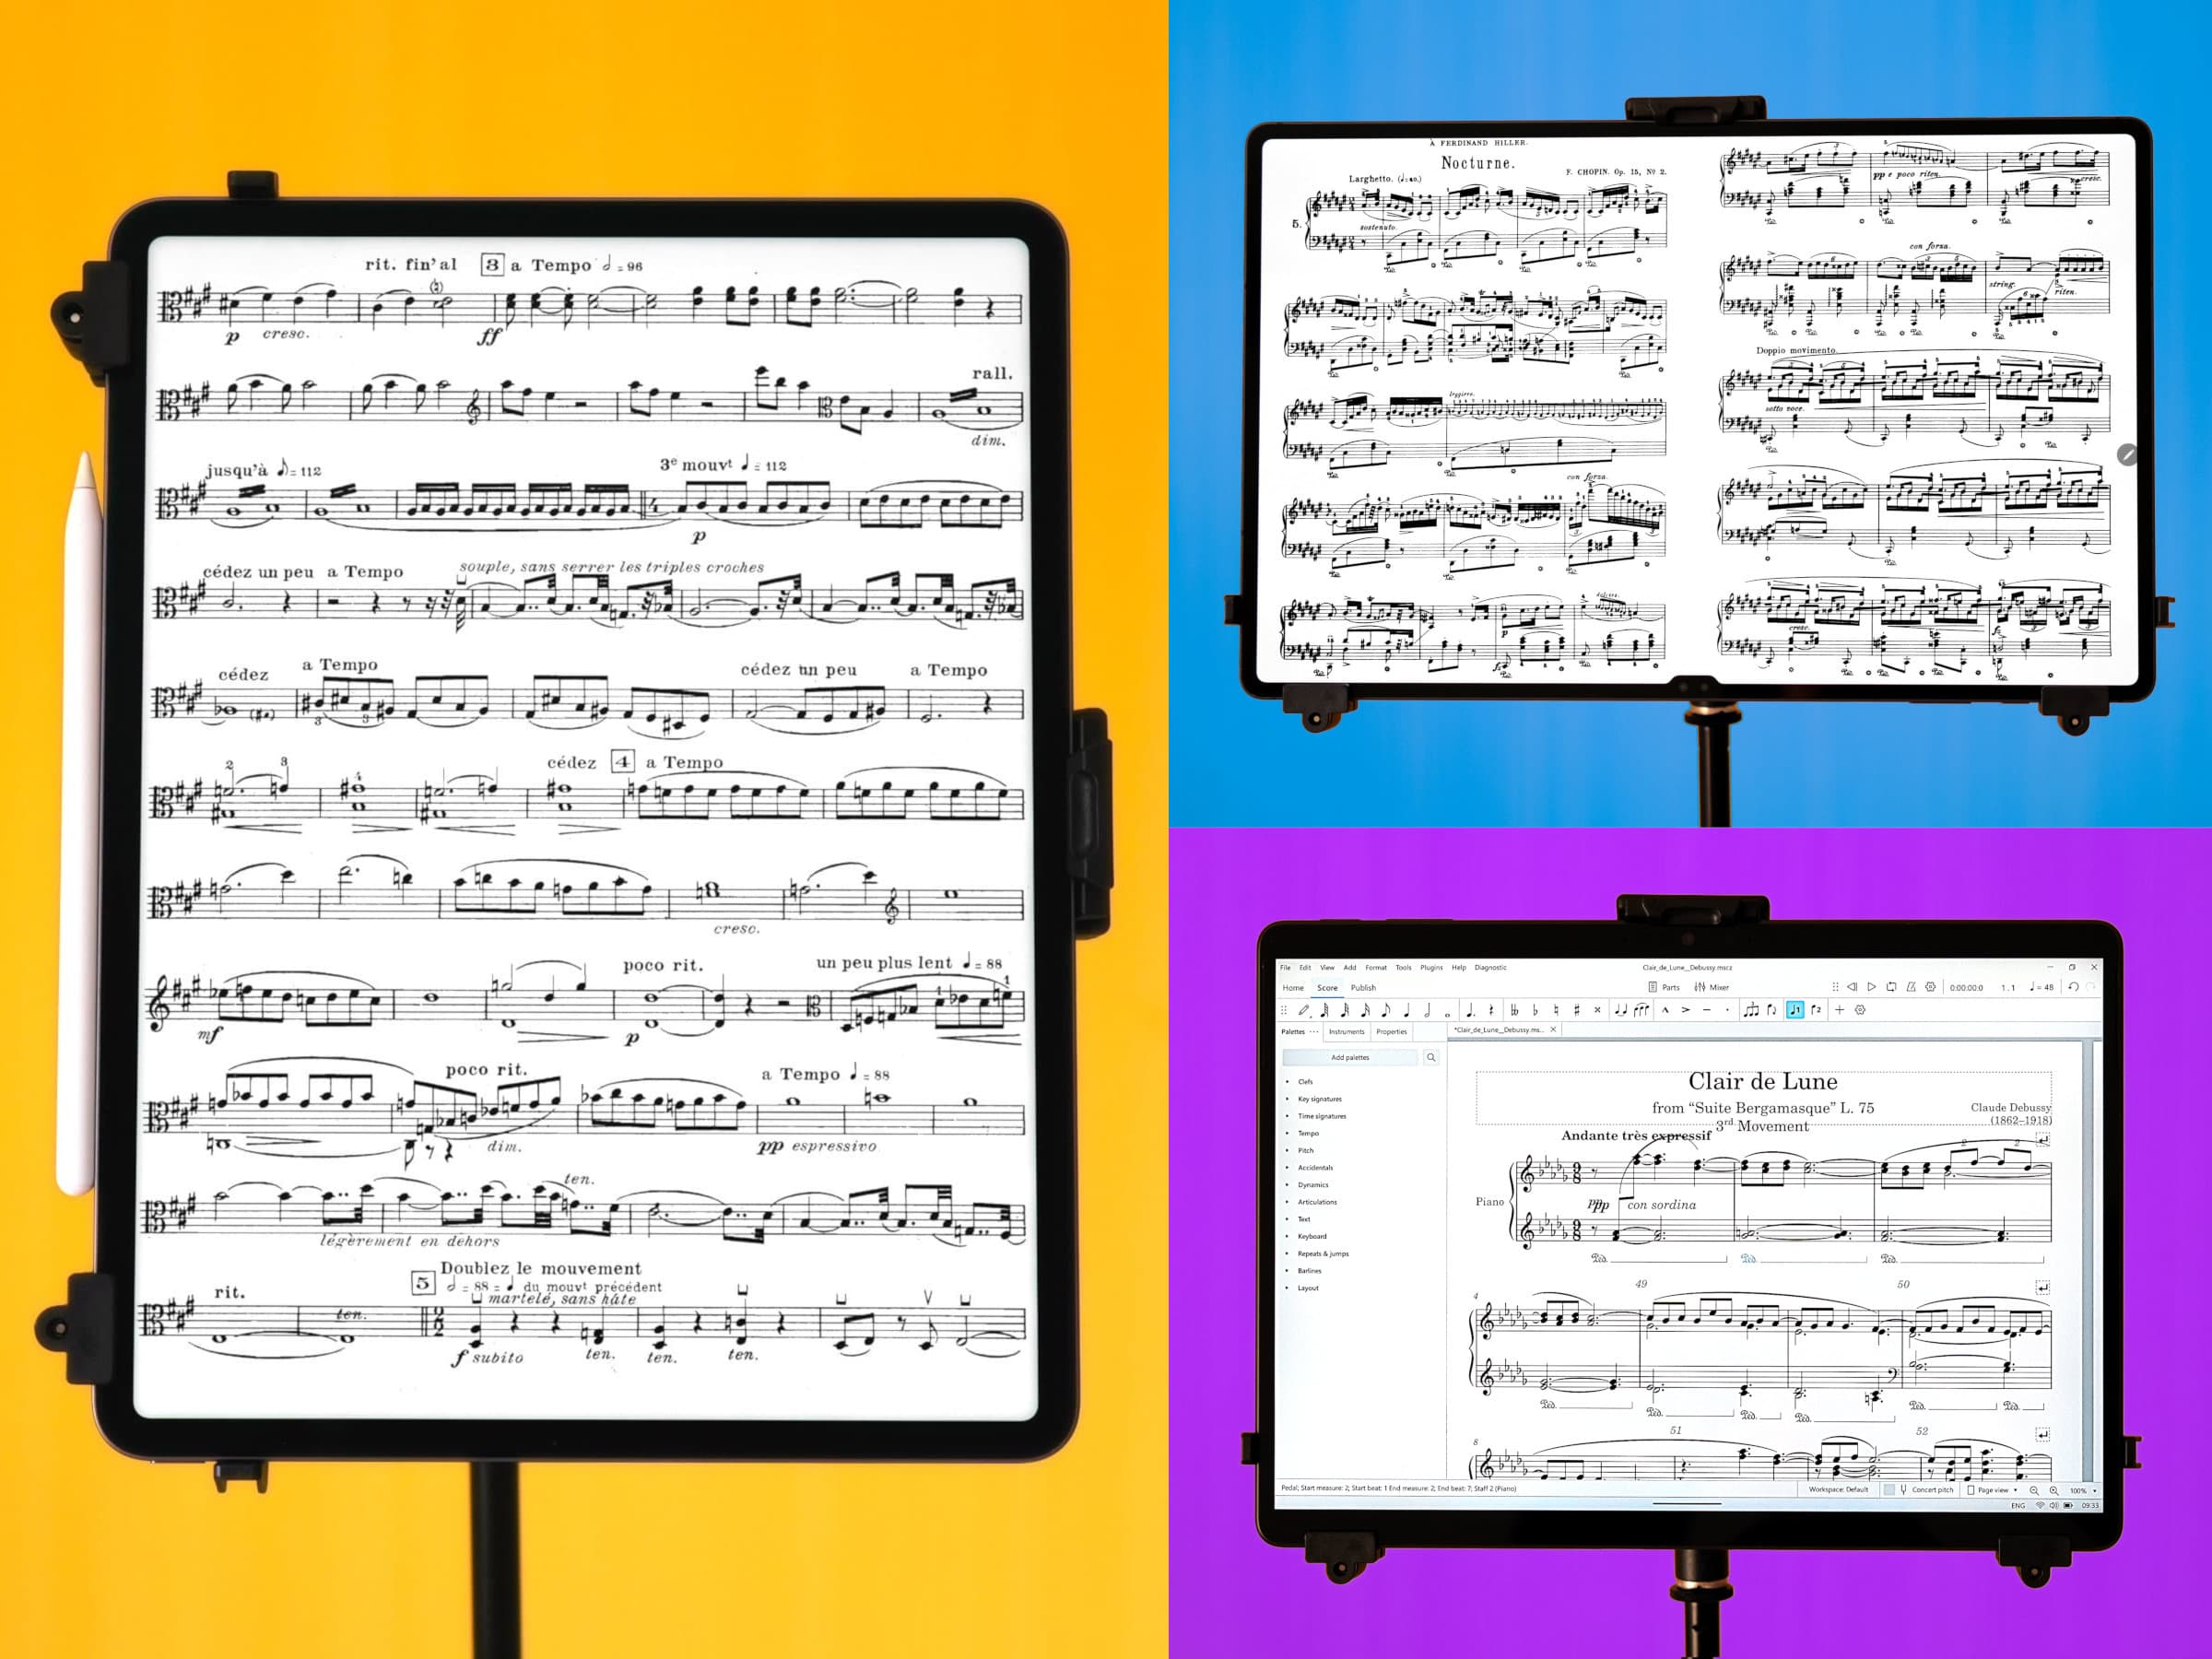 Sheet music on Apple iPad, Android tablets and Windows 2-in-1 convertibles